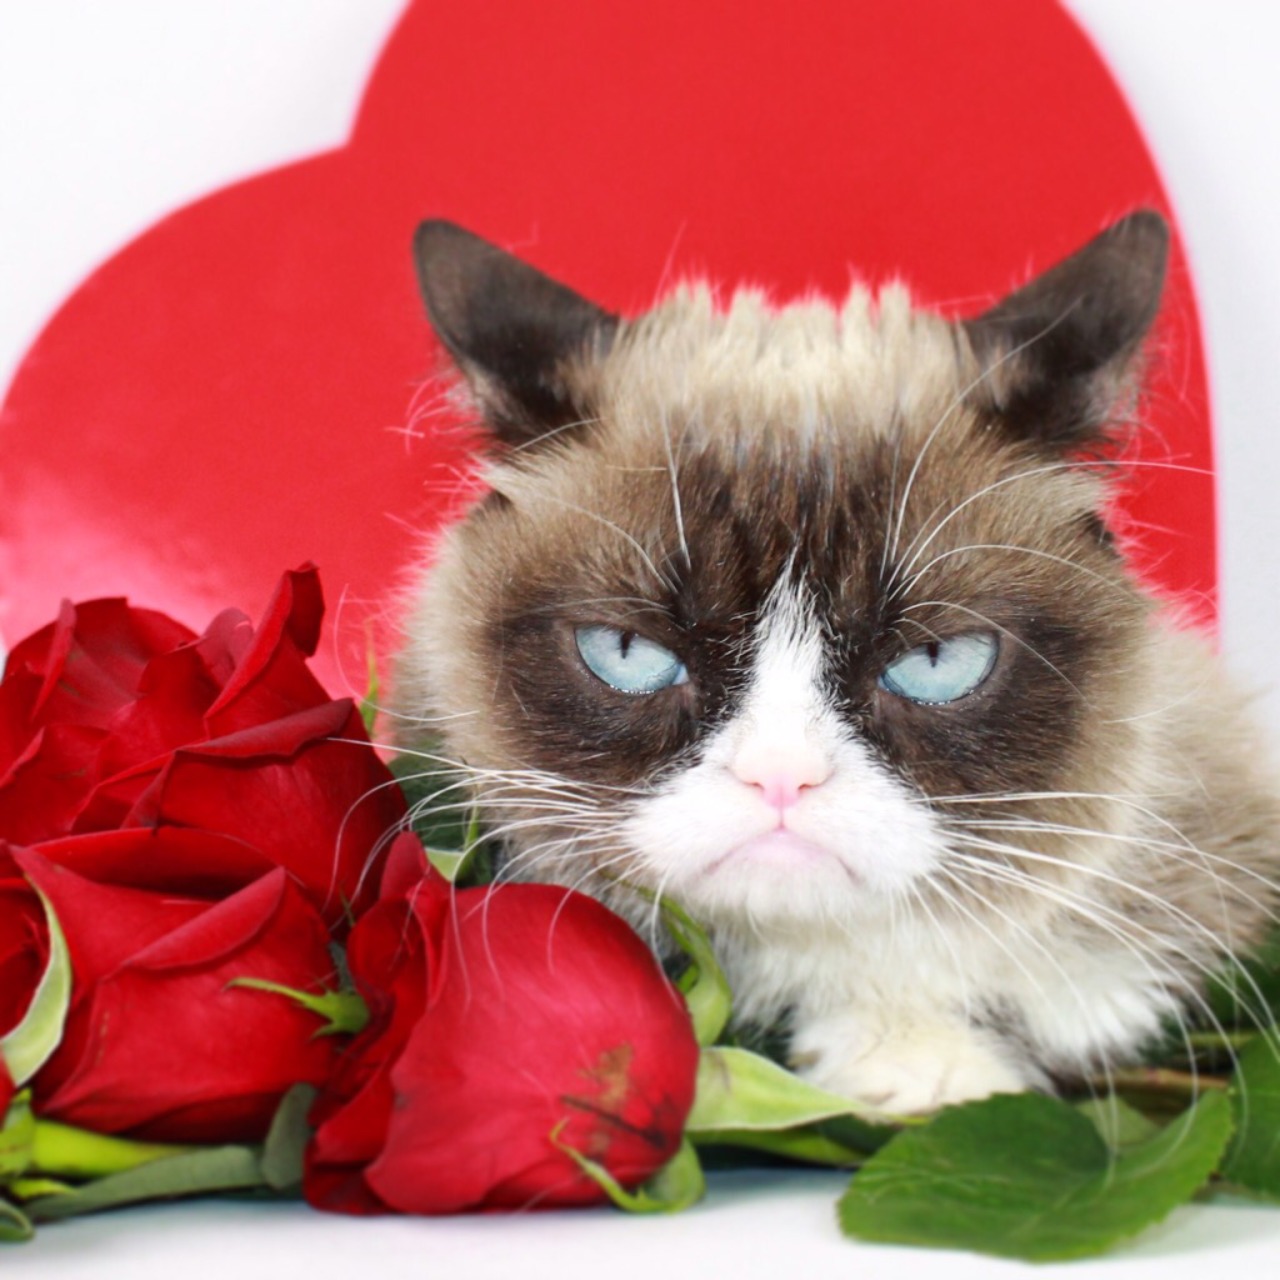 Make this picture a meme to enter to win a Valentines shirt!
Get 20% off now: https://grumpy.cat/GCVDayTees #GrumpyVDay